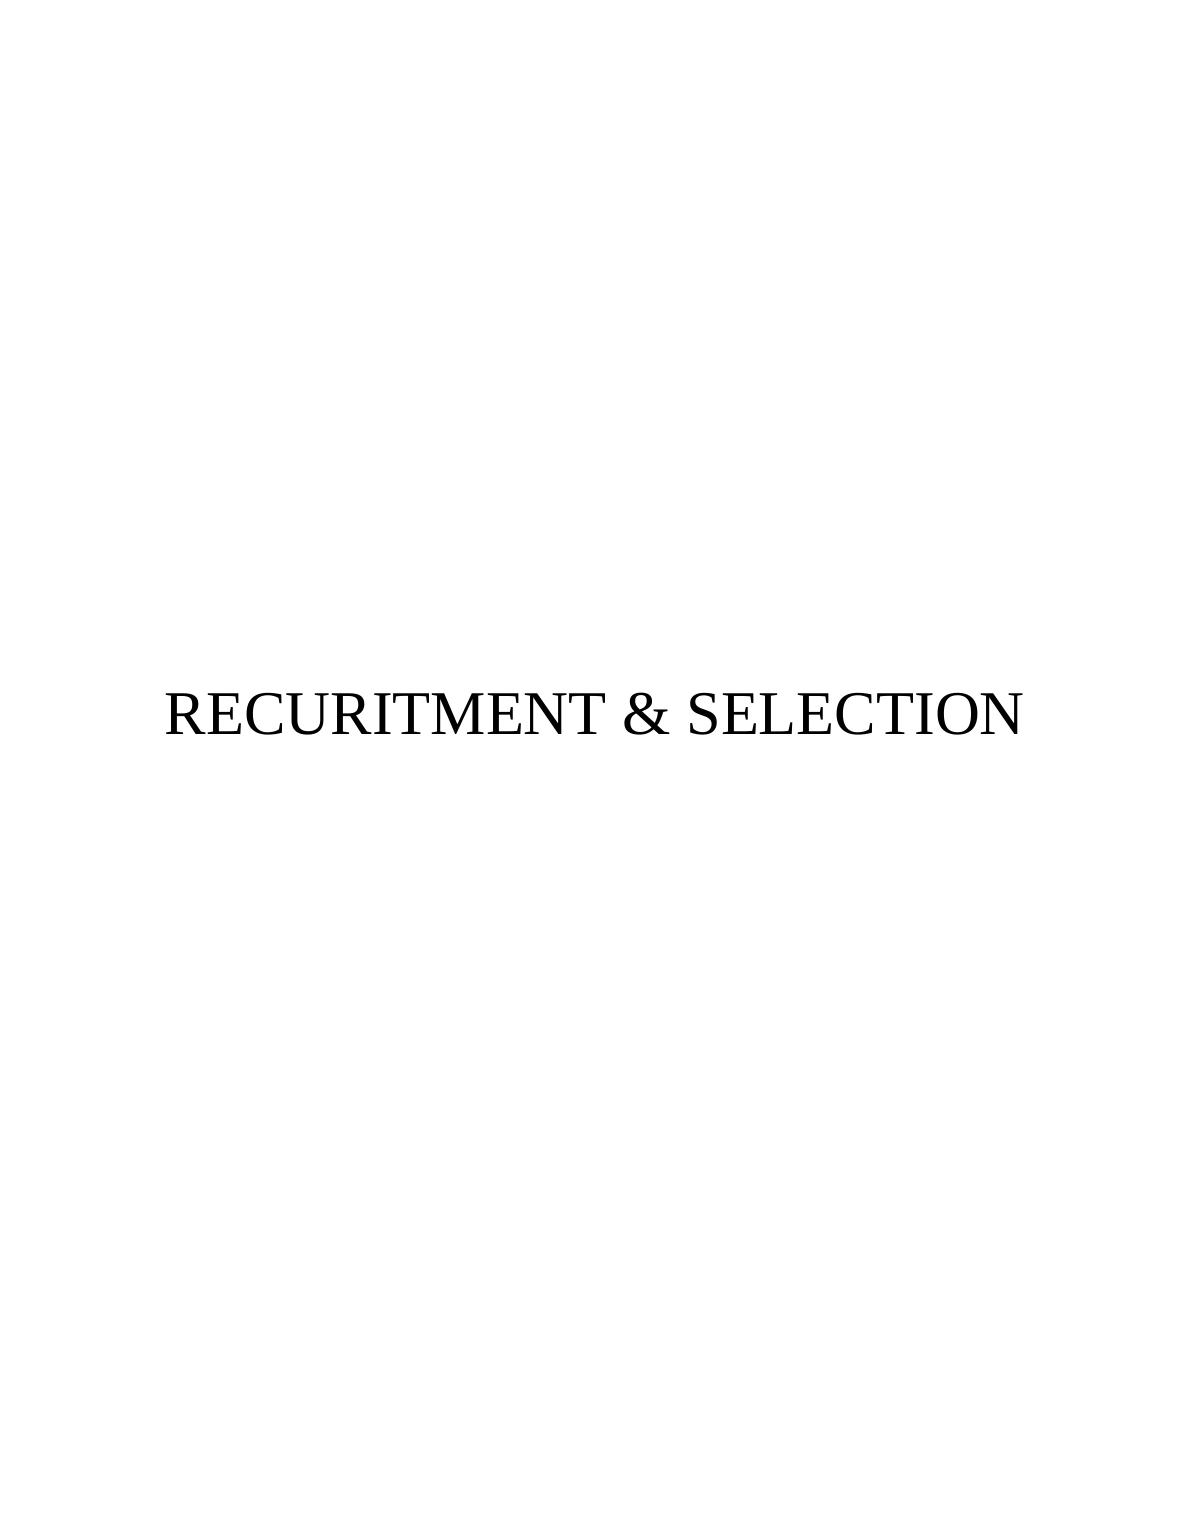 Report on Recruitment and Selection_1